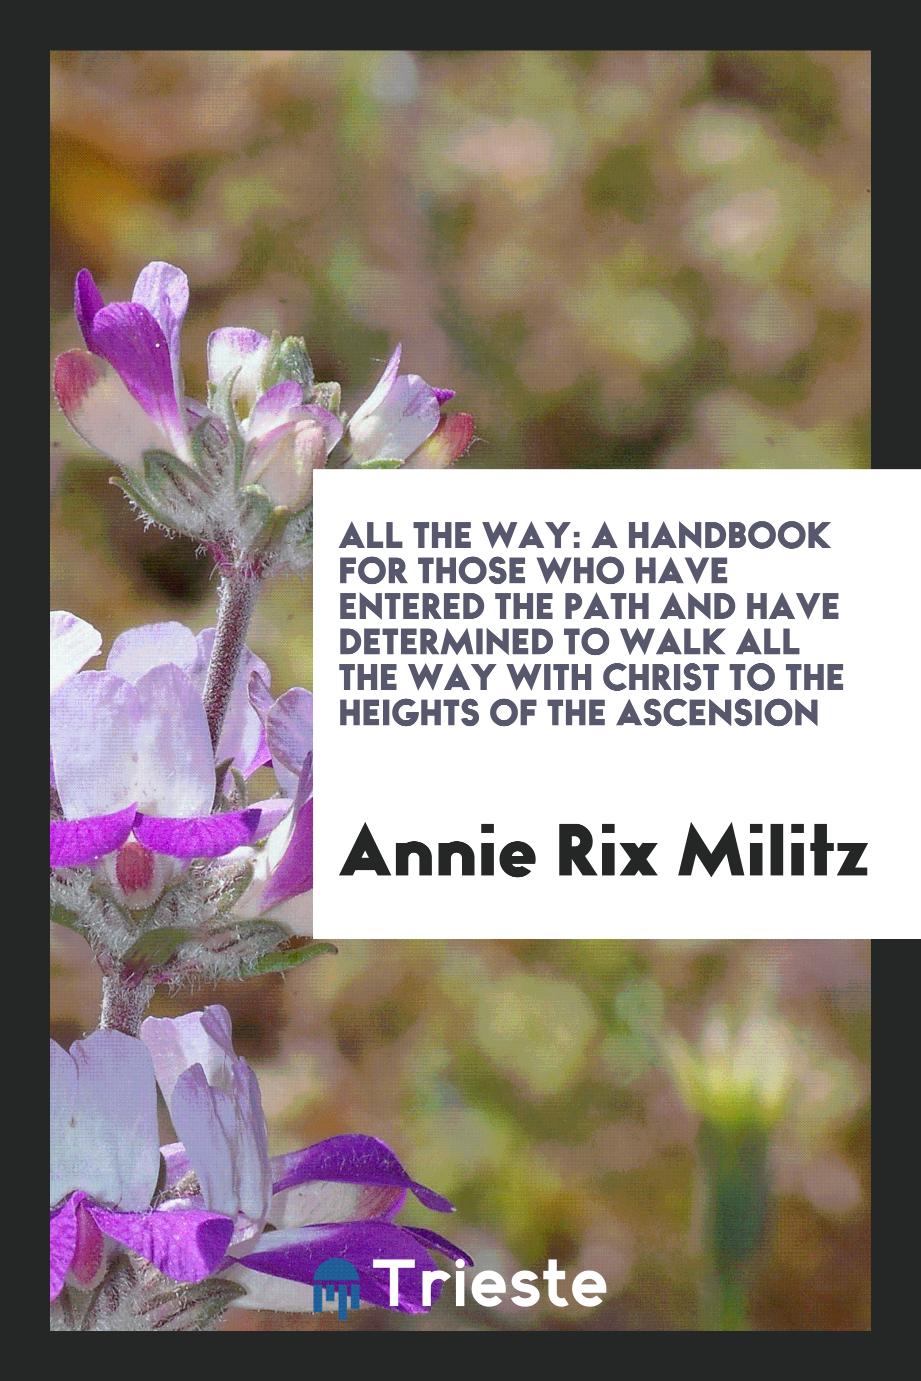 All the way: a handbook for those who have entered the path and have determined to walk all the way with Christ to the heights of the ascension